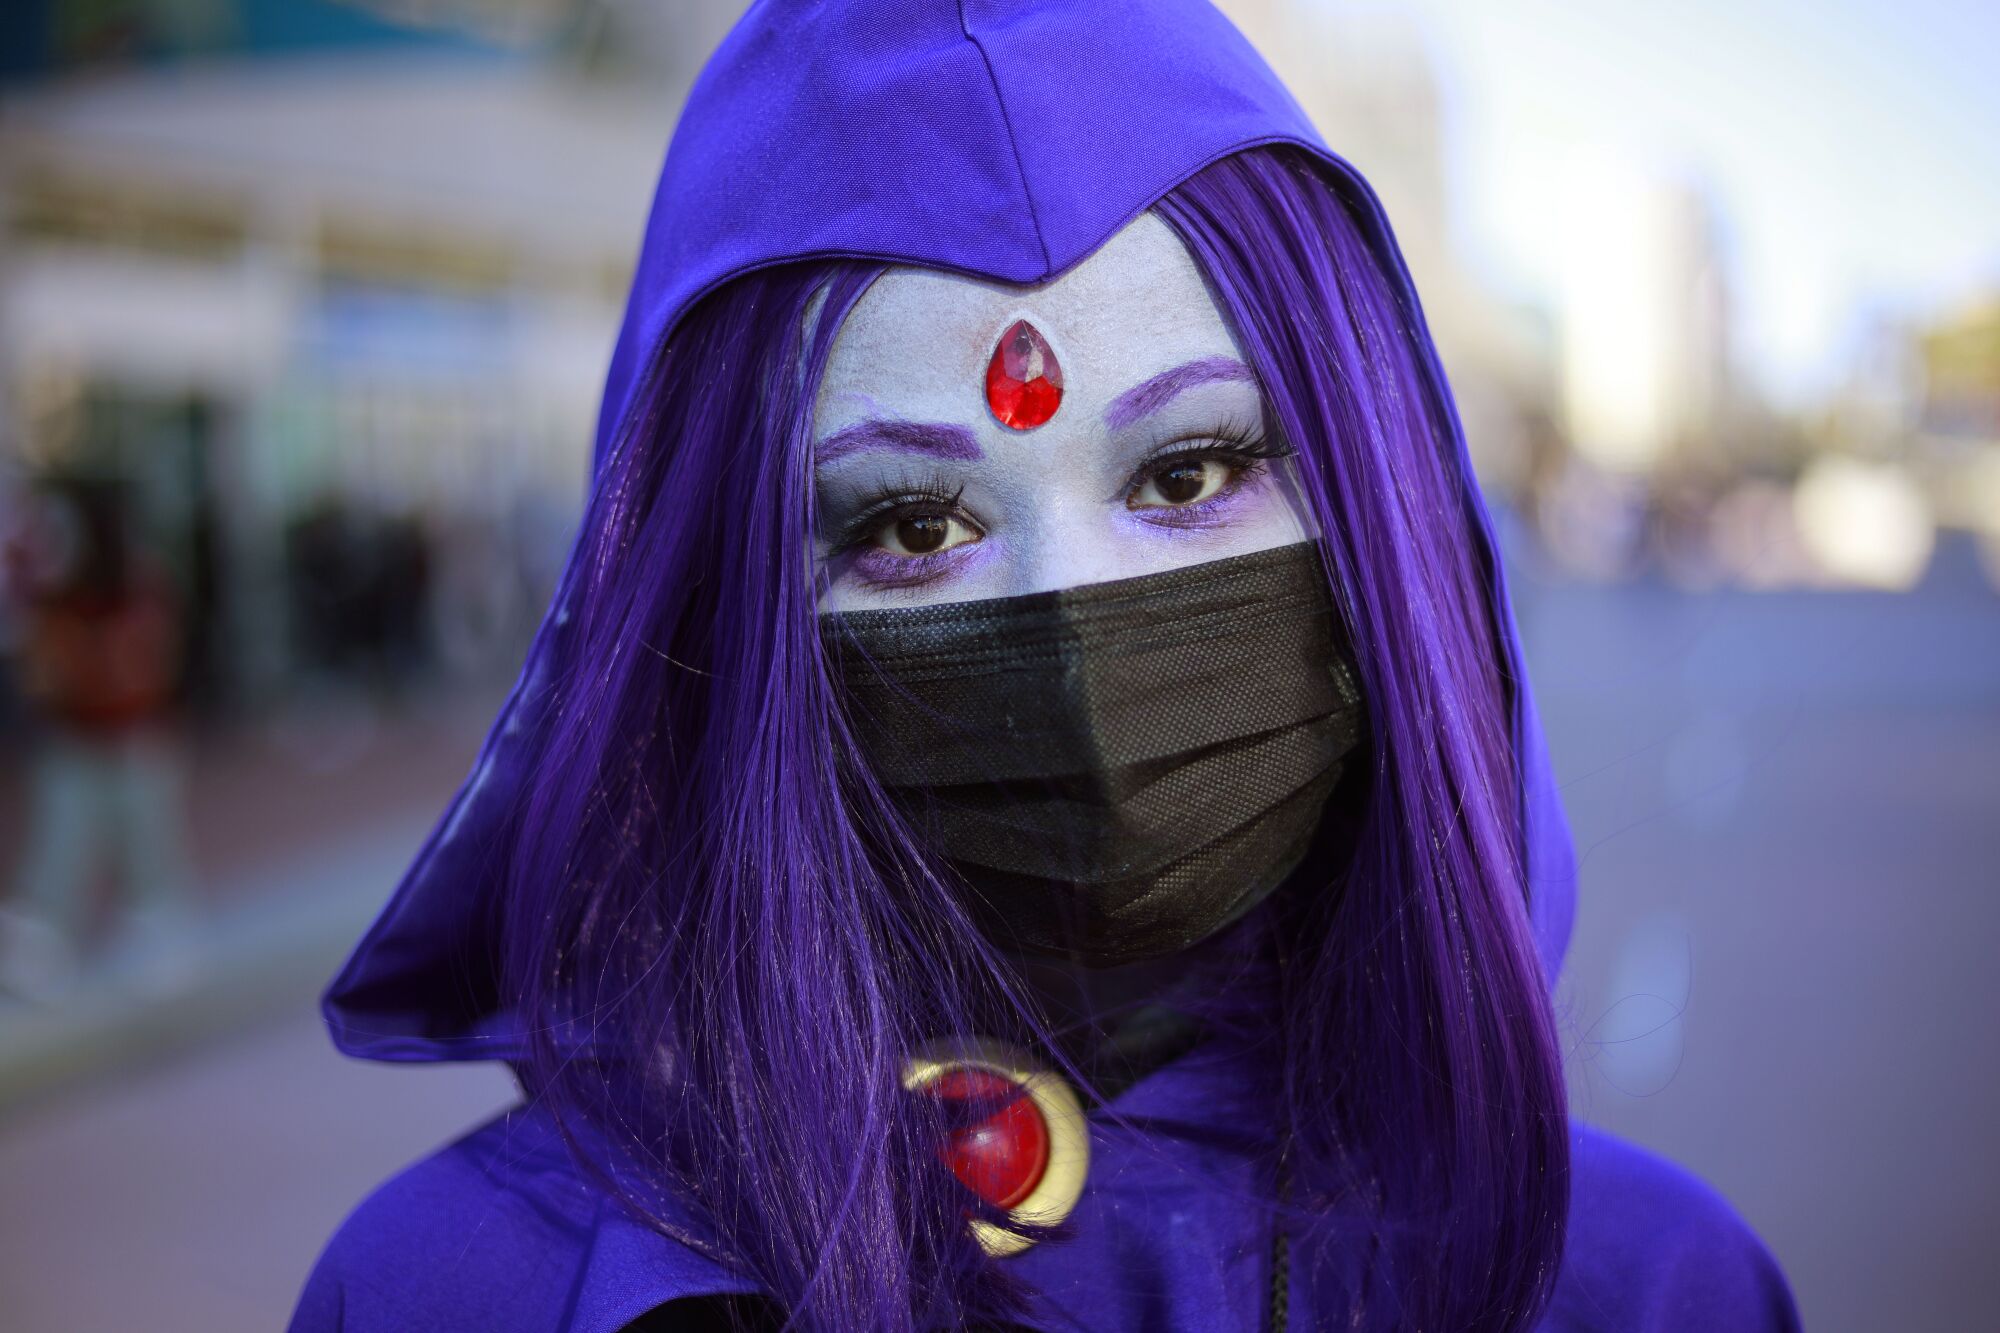 Giselle Dougan of San Diego dressed as Raven at Comic-Con Special Edition.